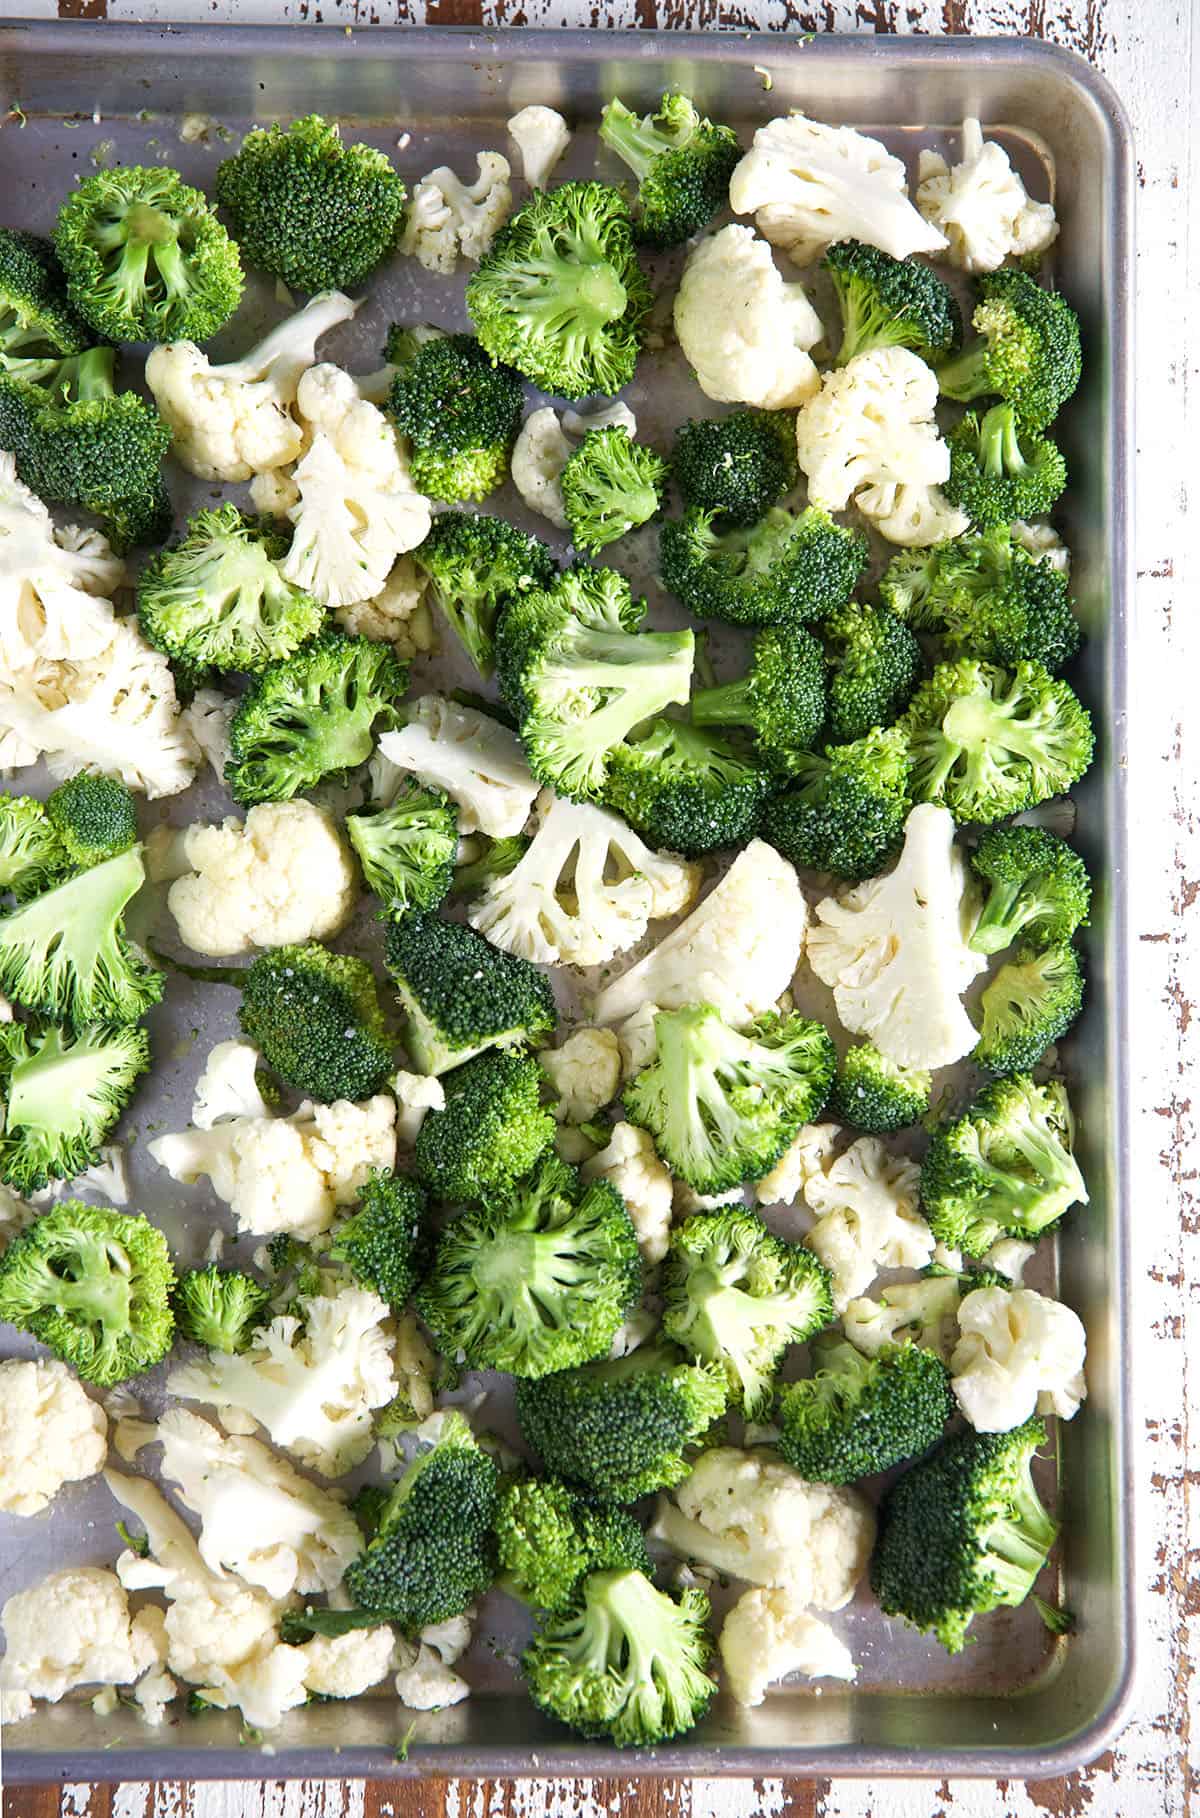 Uncooked broccoli and cauliflower are spread out on a baking sheet.